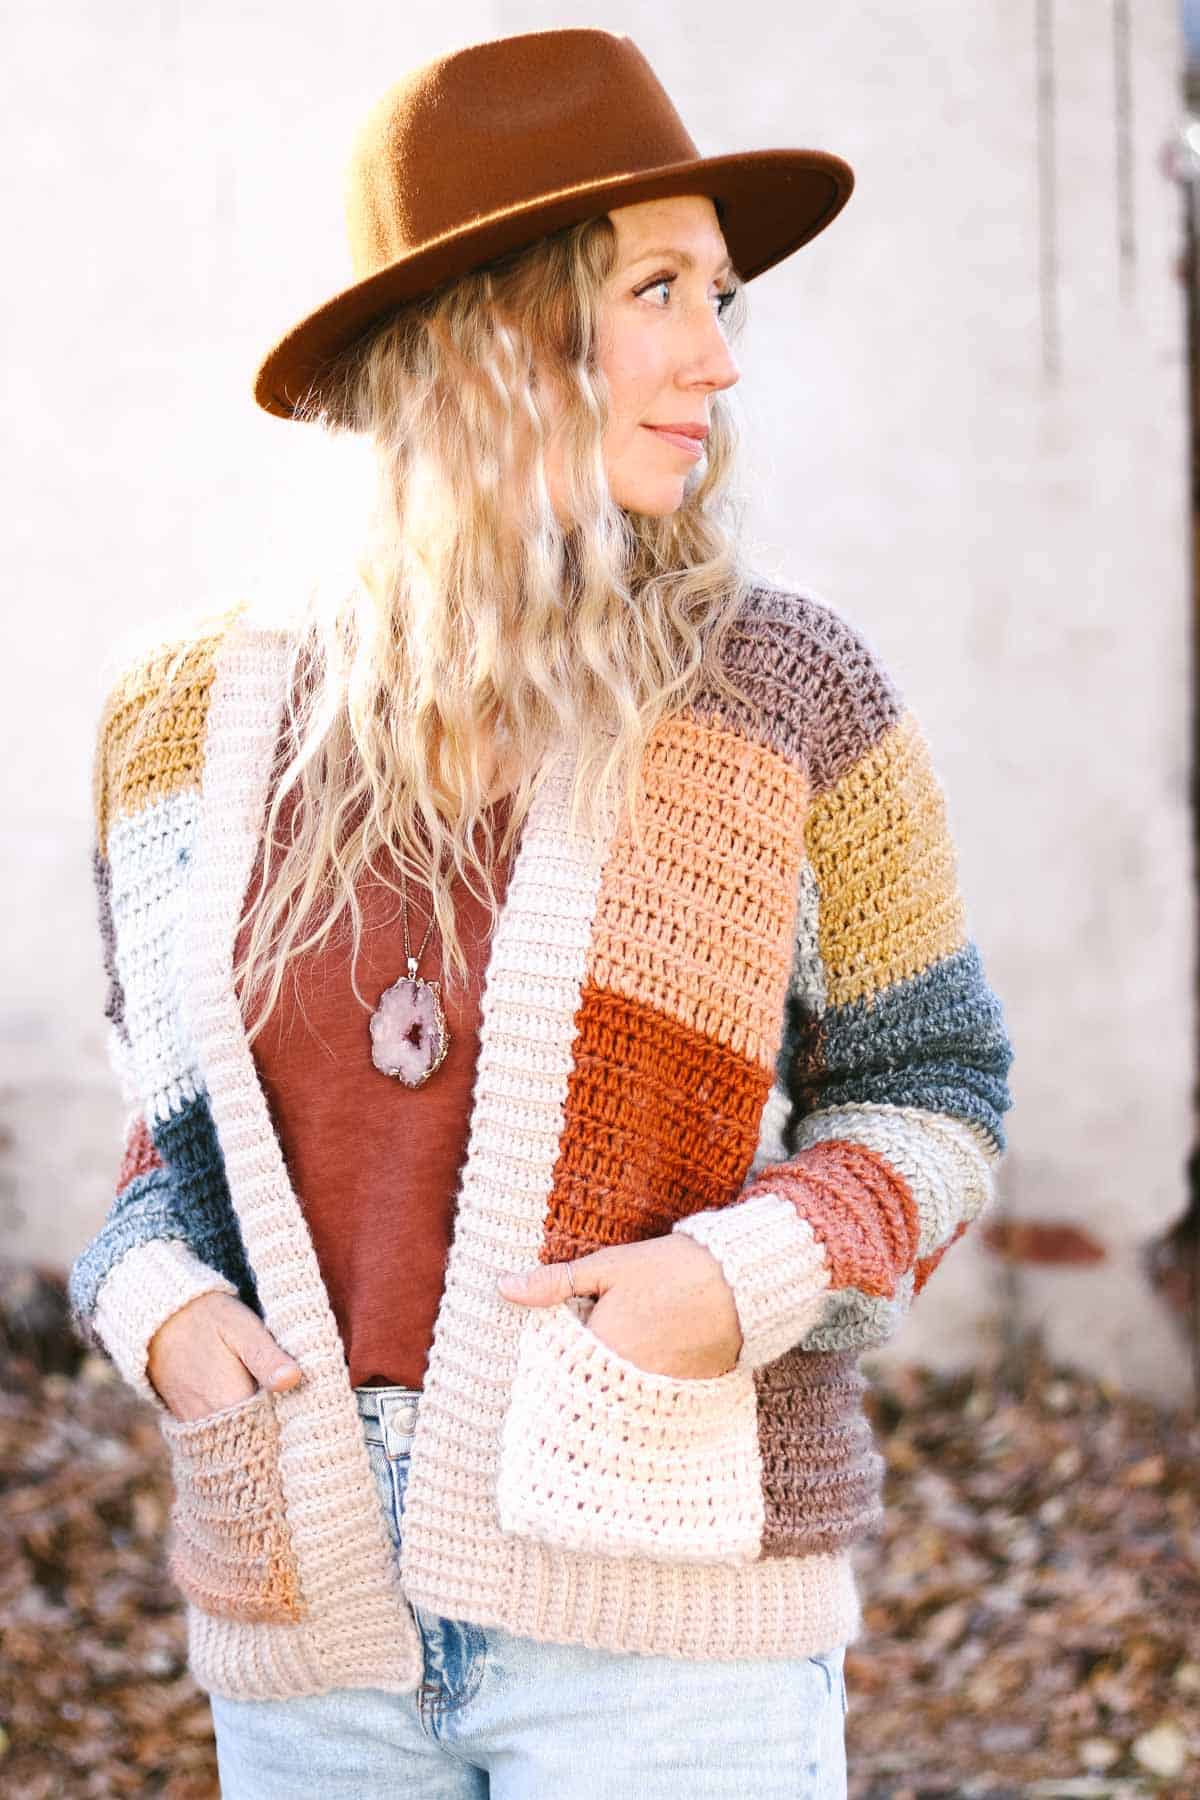 Blonde woman wearing a colorful crochet patchwork sweater with crochet ribbing. Her left hand is in the cardigan pocket.